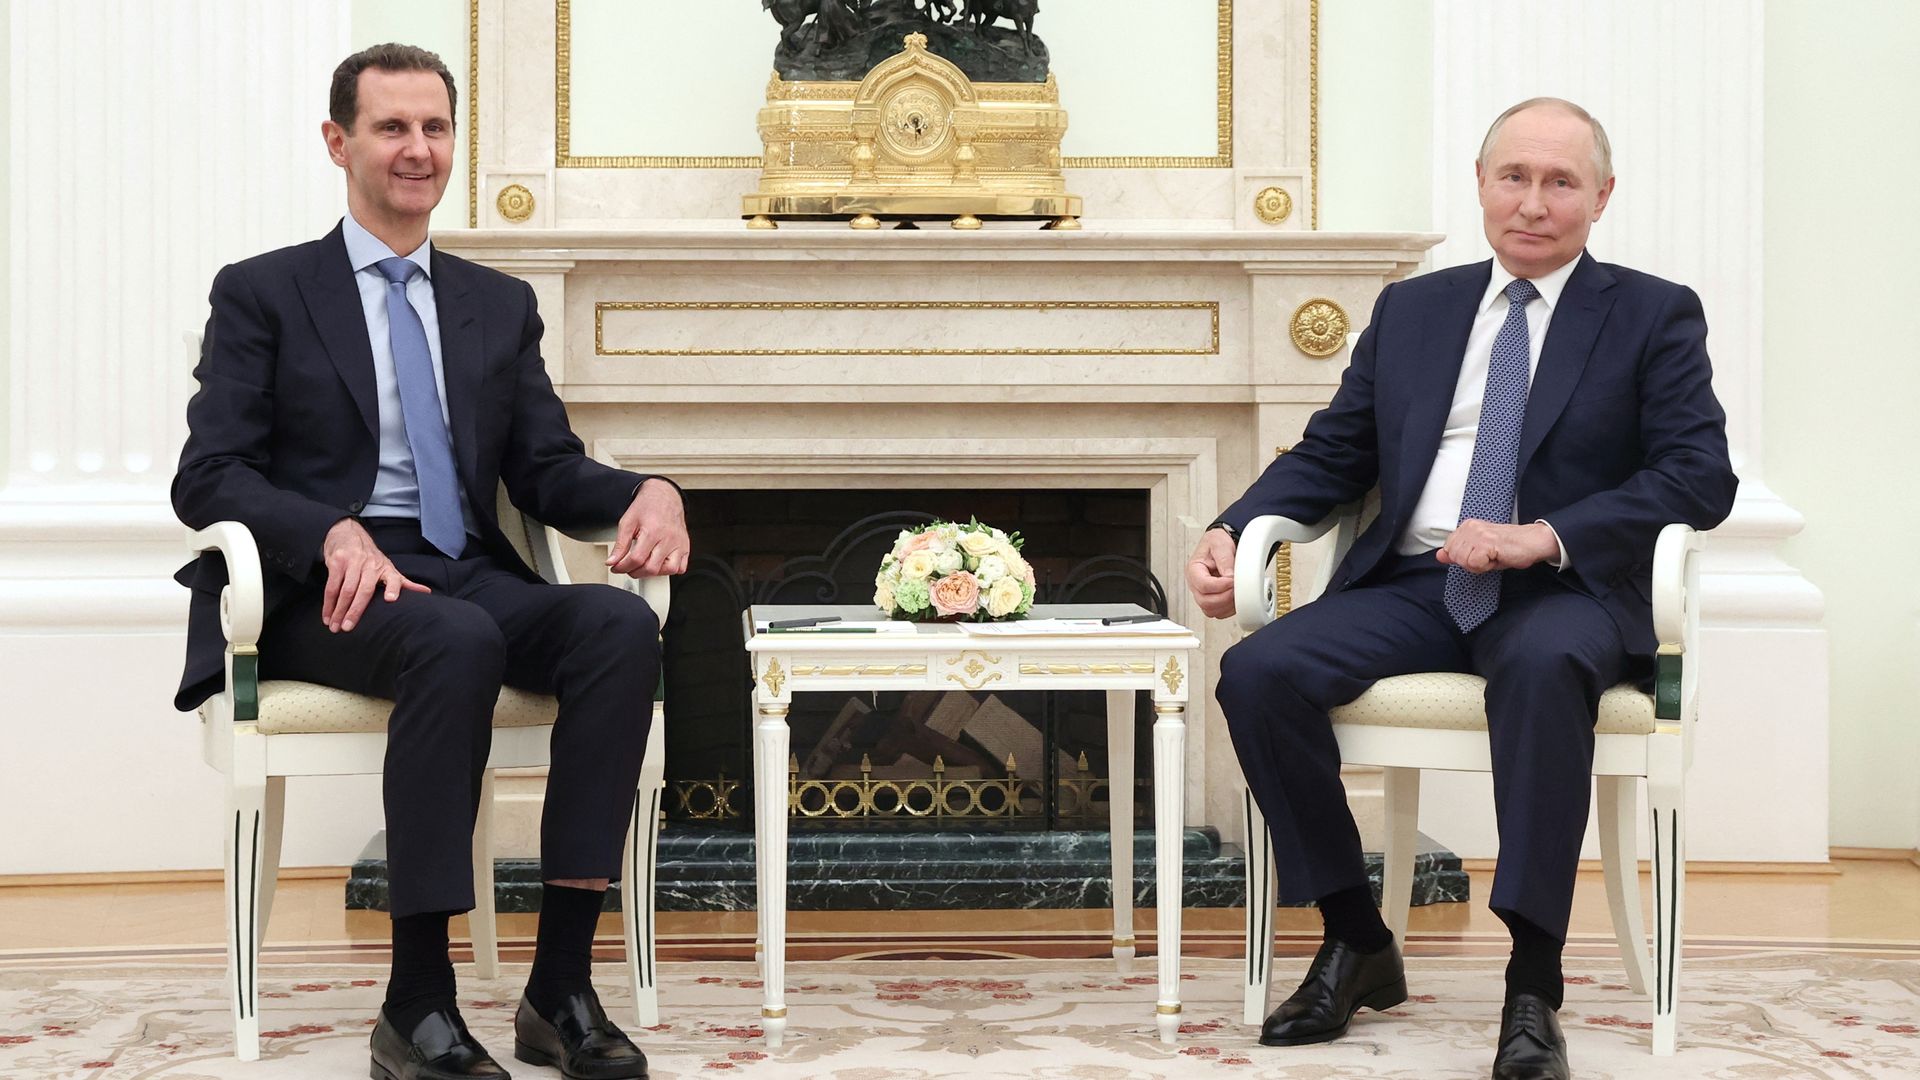 Syrian president makes surprise visit to Russia - after report Putin could play peacemaker role